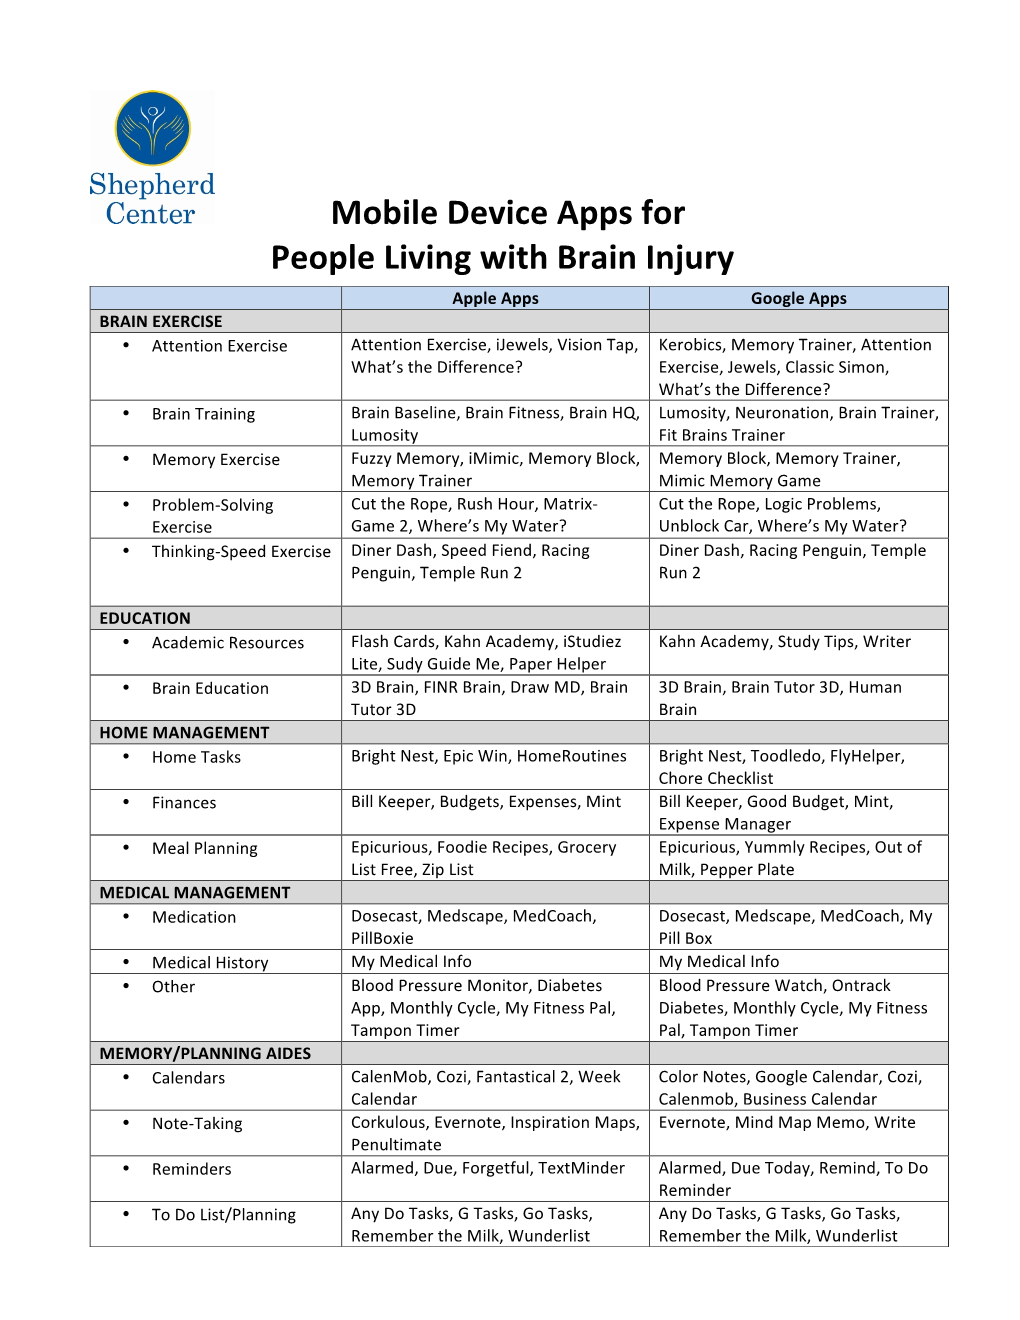 Mobile Device Apps for People Living with Brain Injury